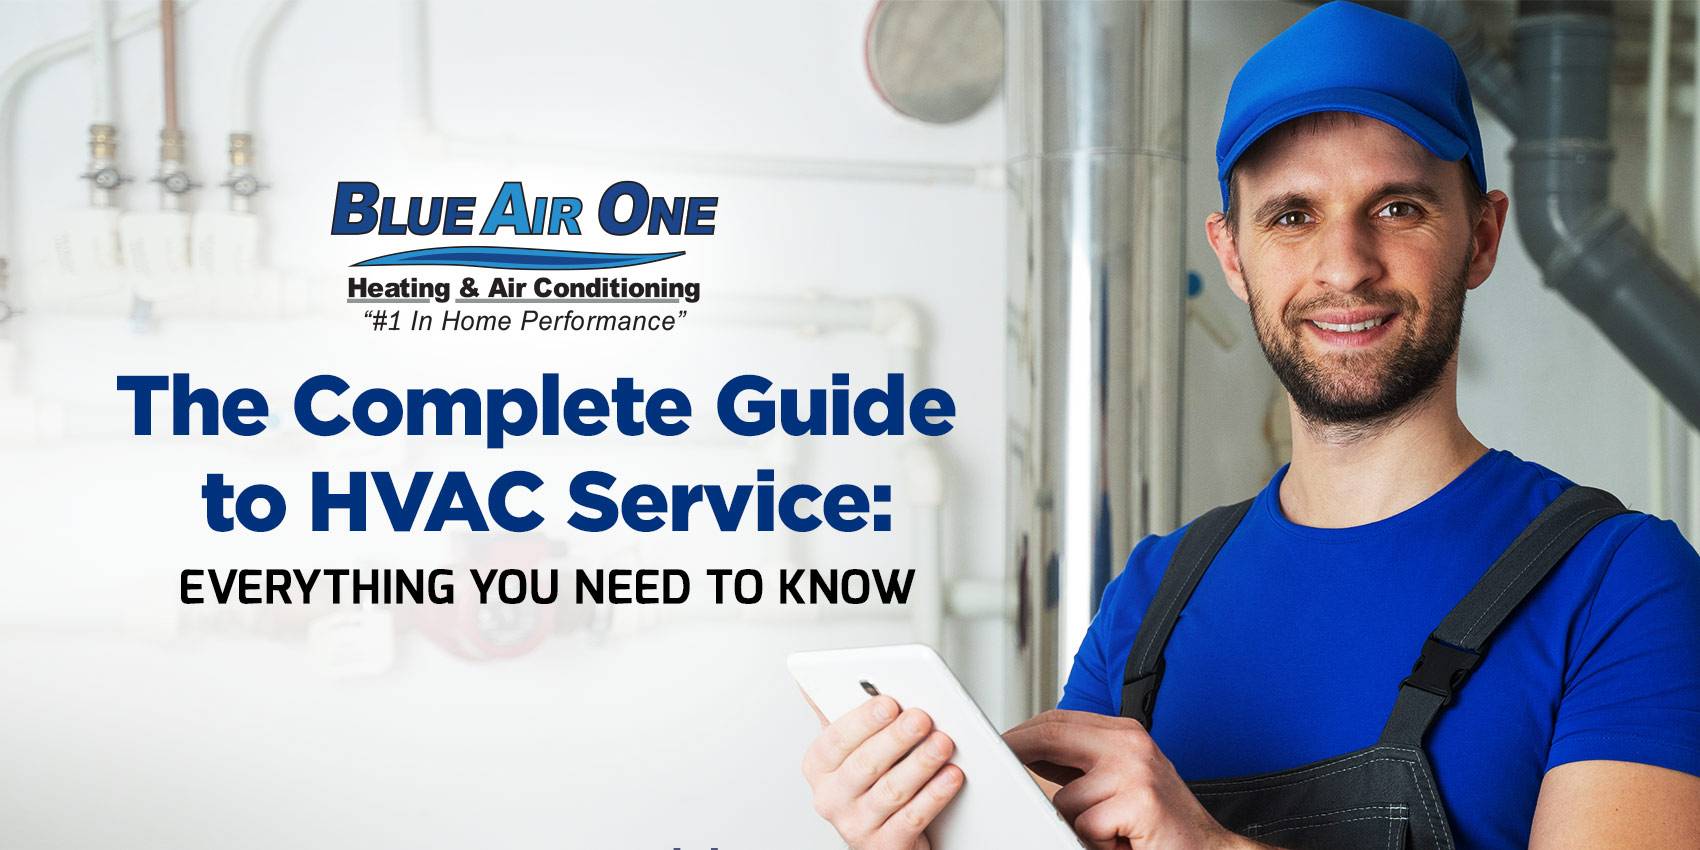 The Complete Guide to HVAC Service: Everything You Need to Know